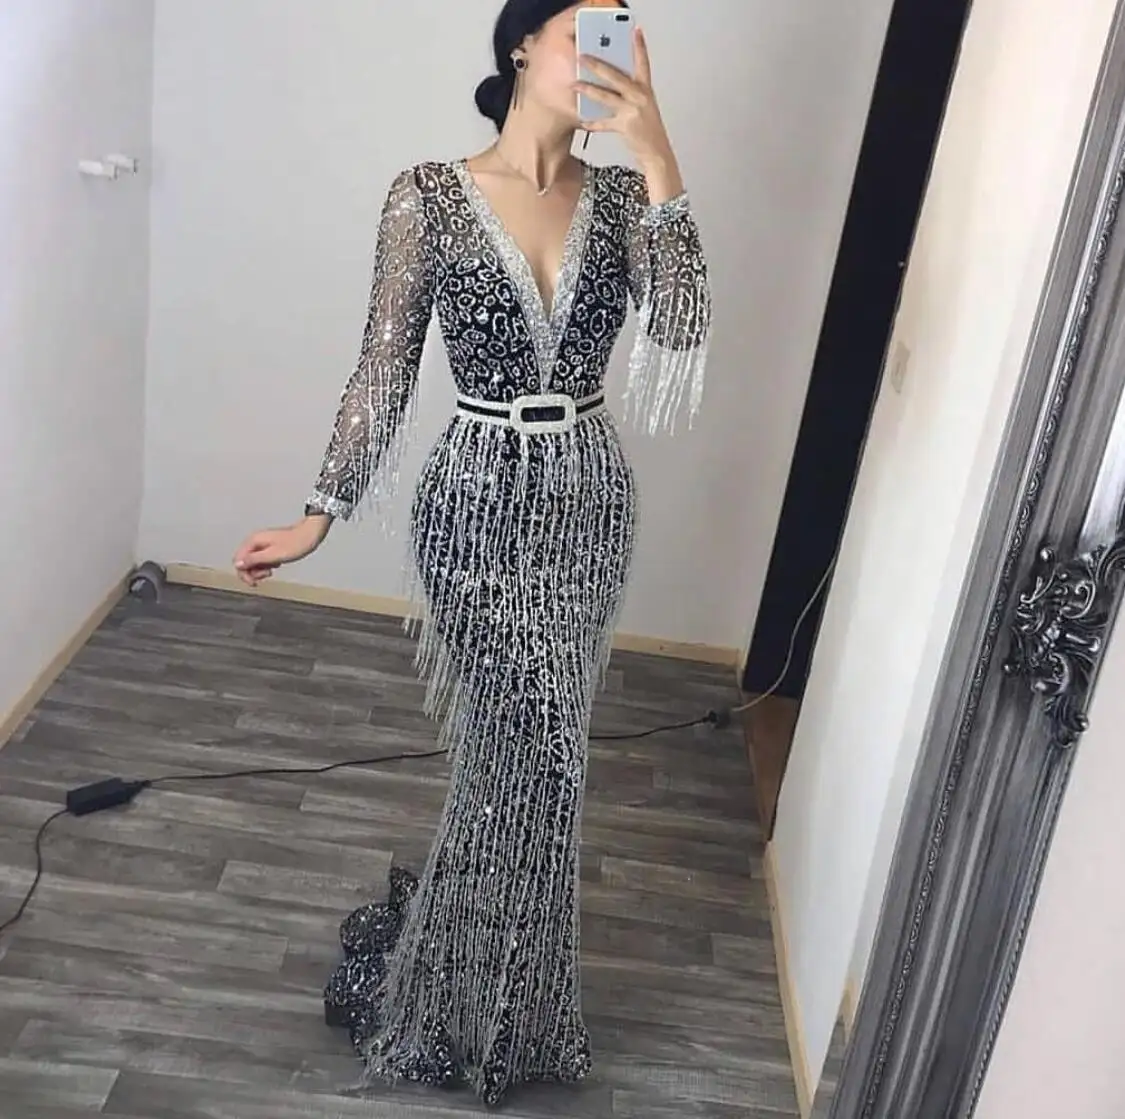 Sexy Deep V-neck Backless Bling Dresses Women party wear dresses for women Ladies maxi tassels Bridal Party Wear Evening mermaid